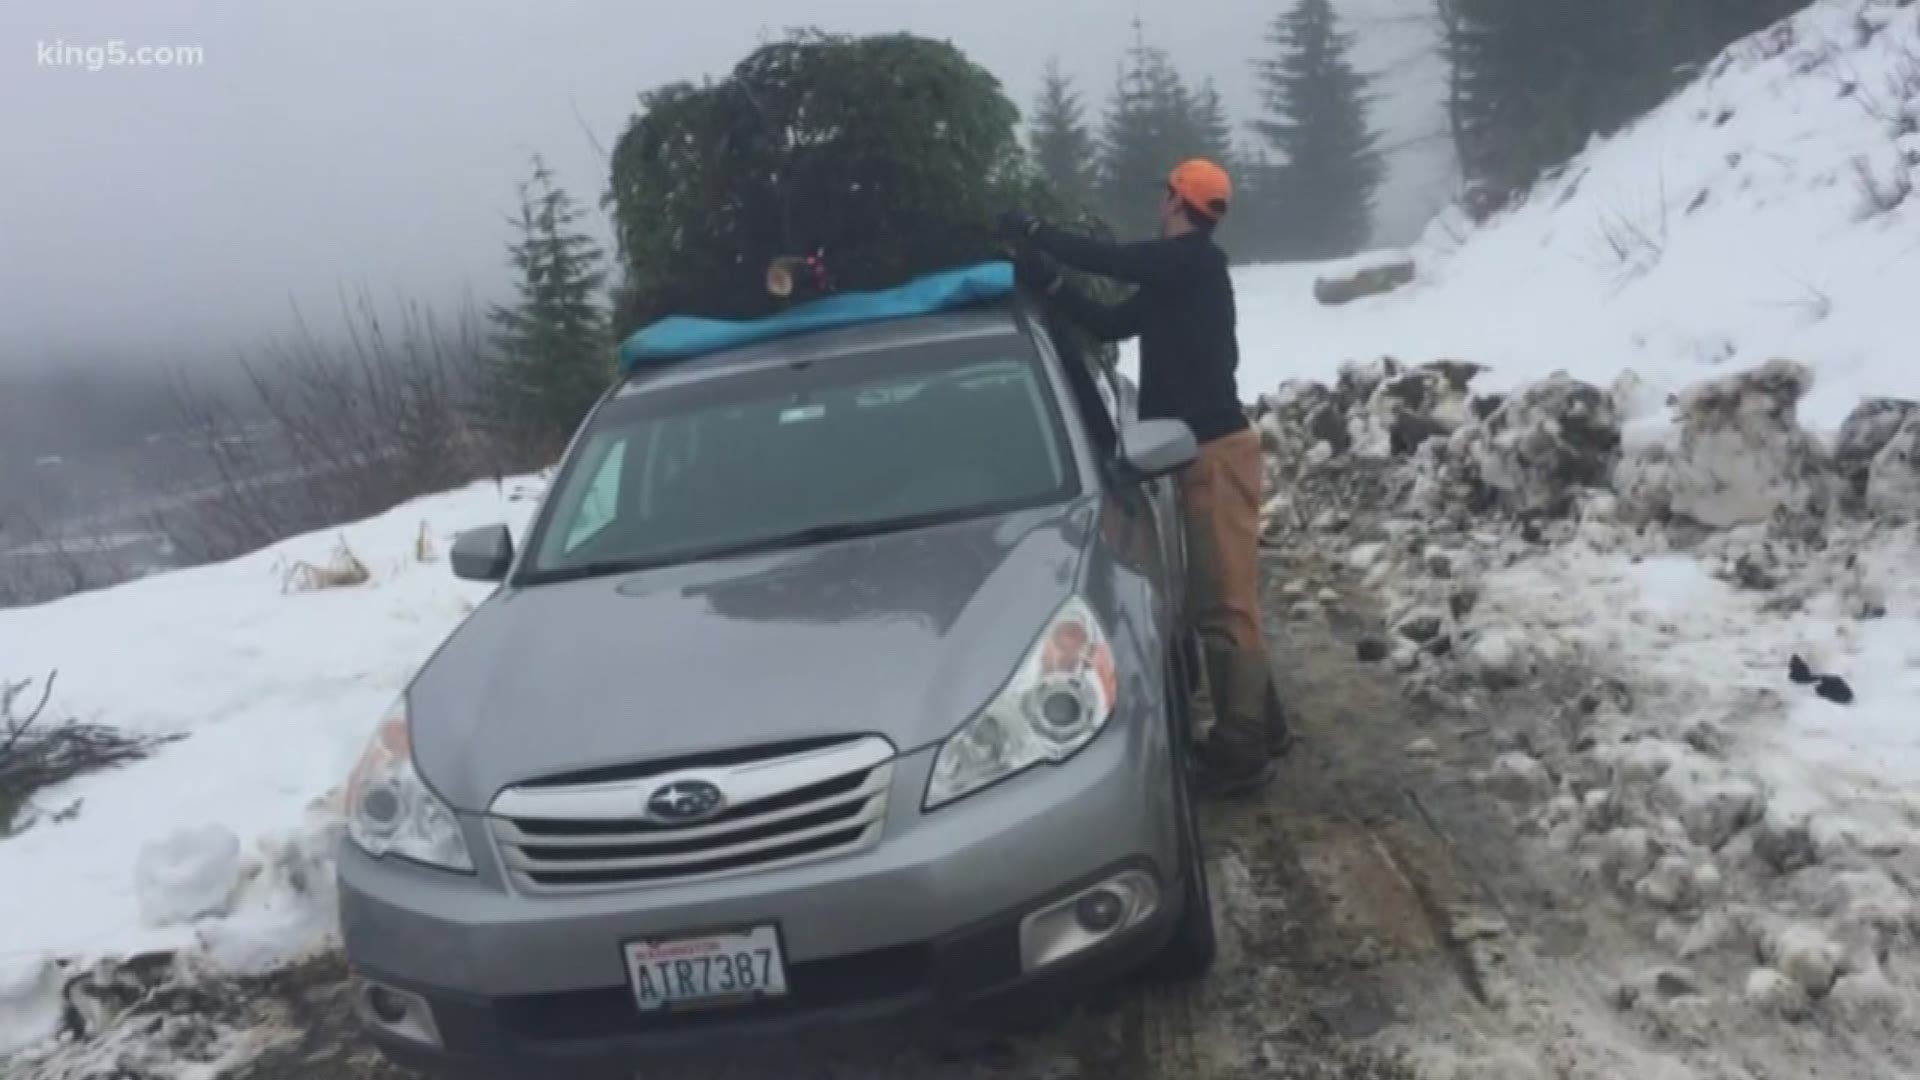 KING 5 Meteorologist Ben Dery shows you the legal way to cut your own Christmas tree.